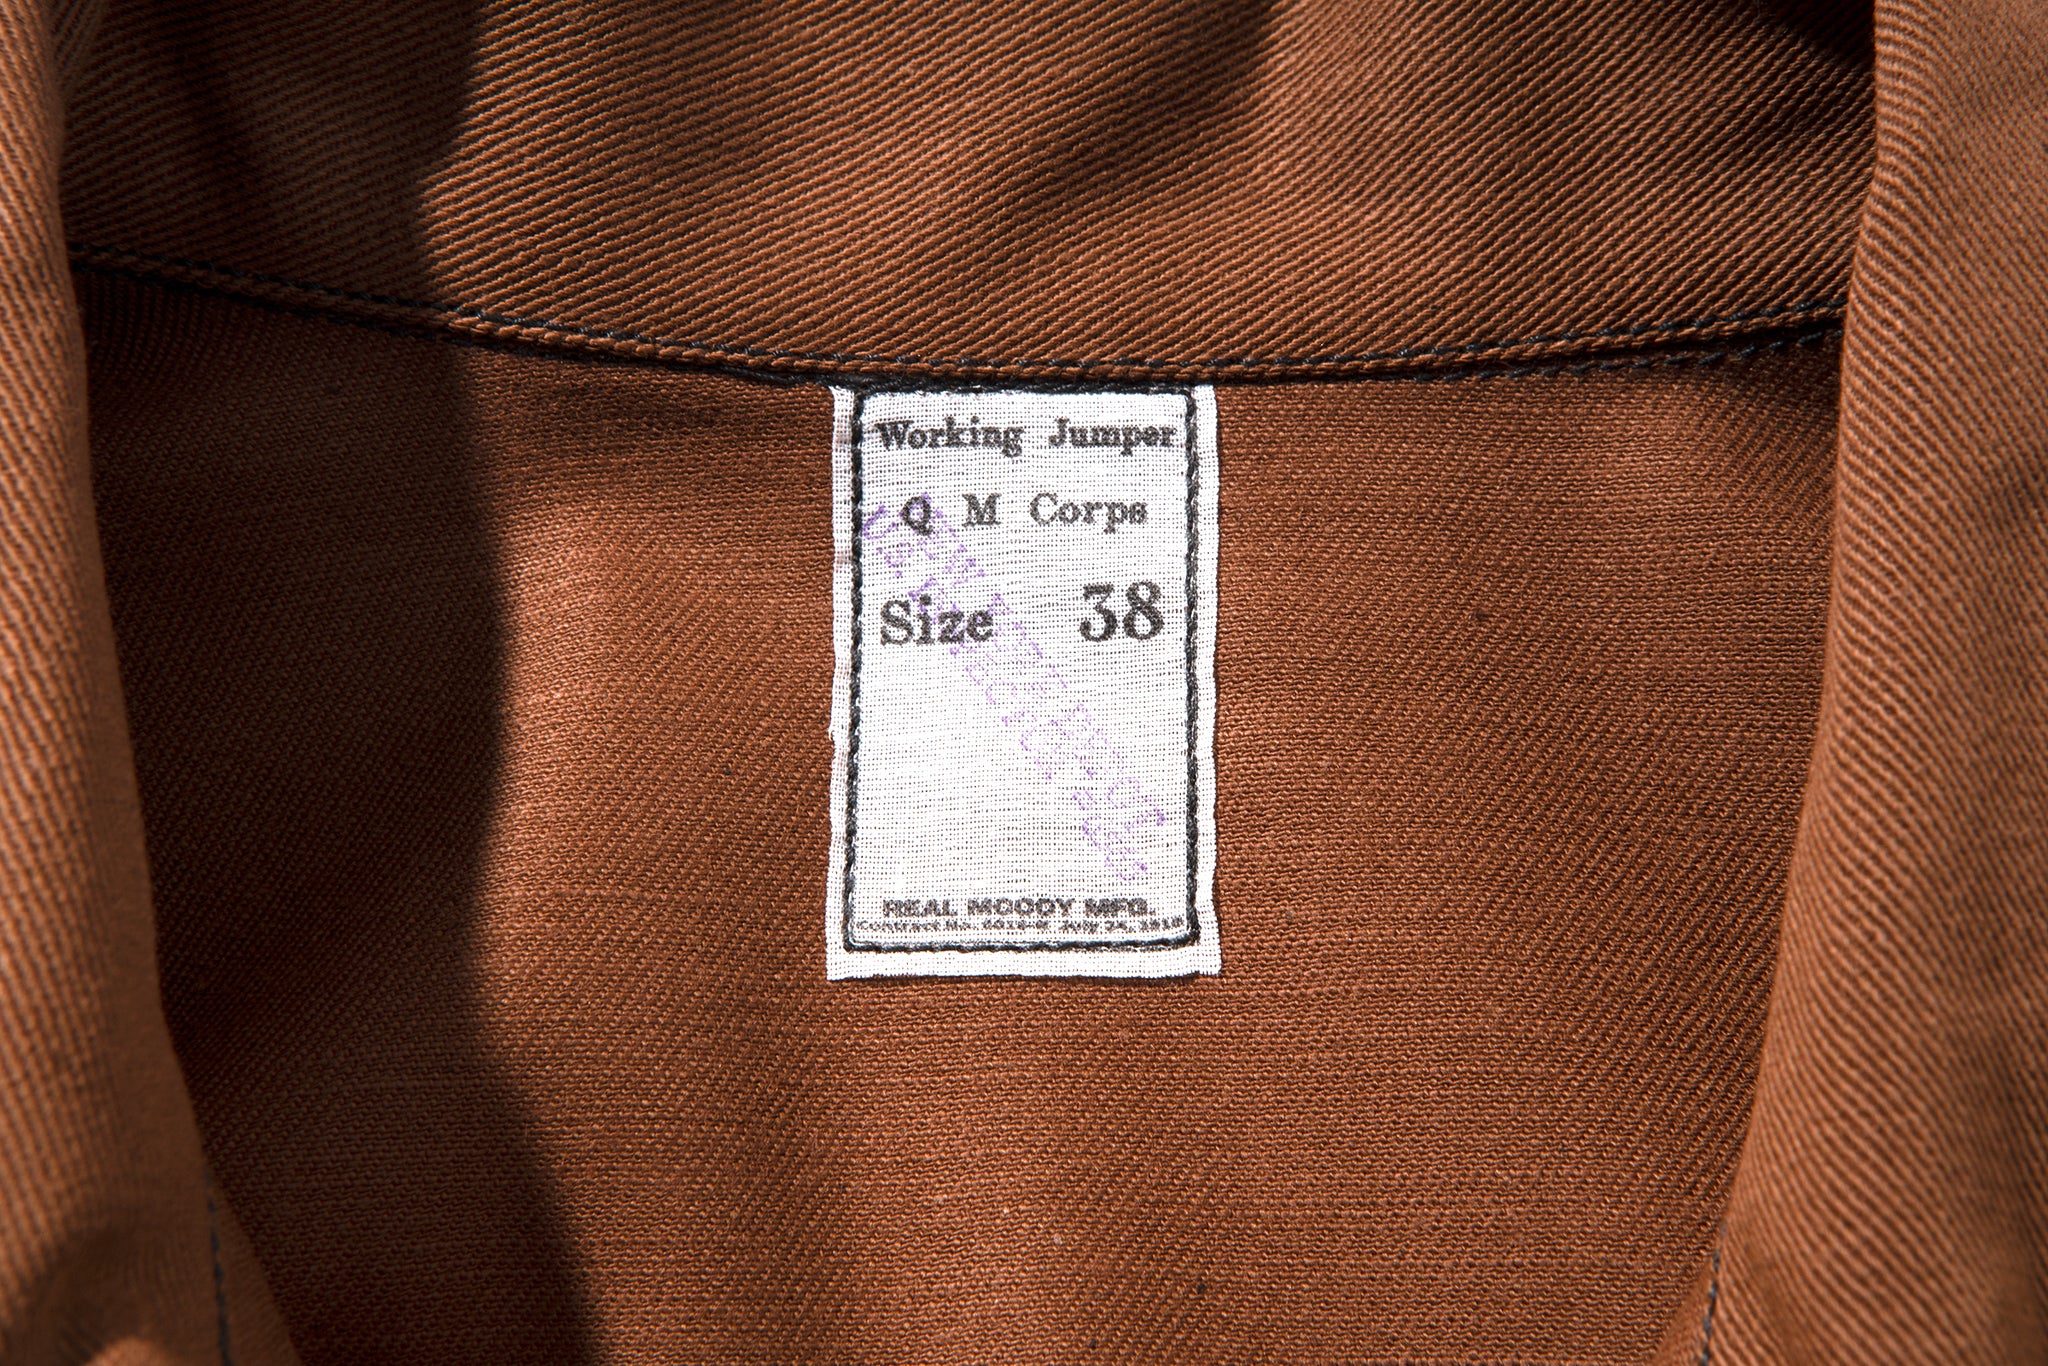 WW1 BROWN FATIGUE COAT – The Real McCoy's